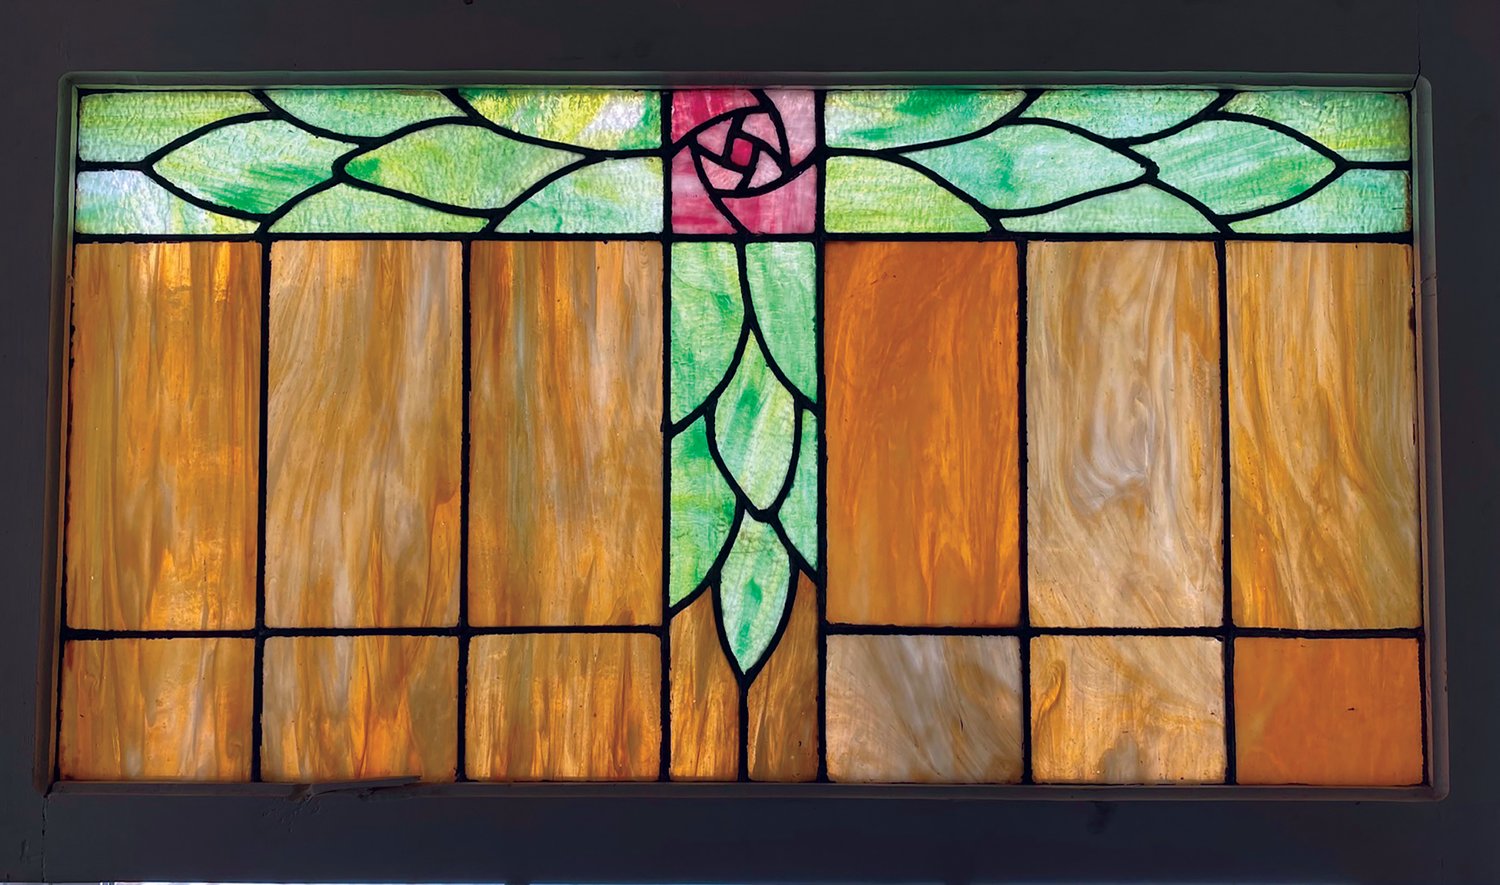 This stained-glass window features a mackintosh rose, which is in the Rose Cottage's logo.